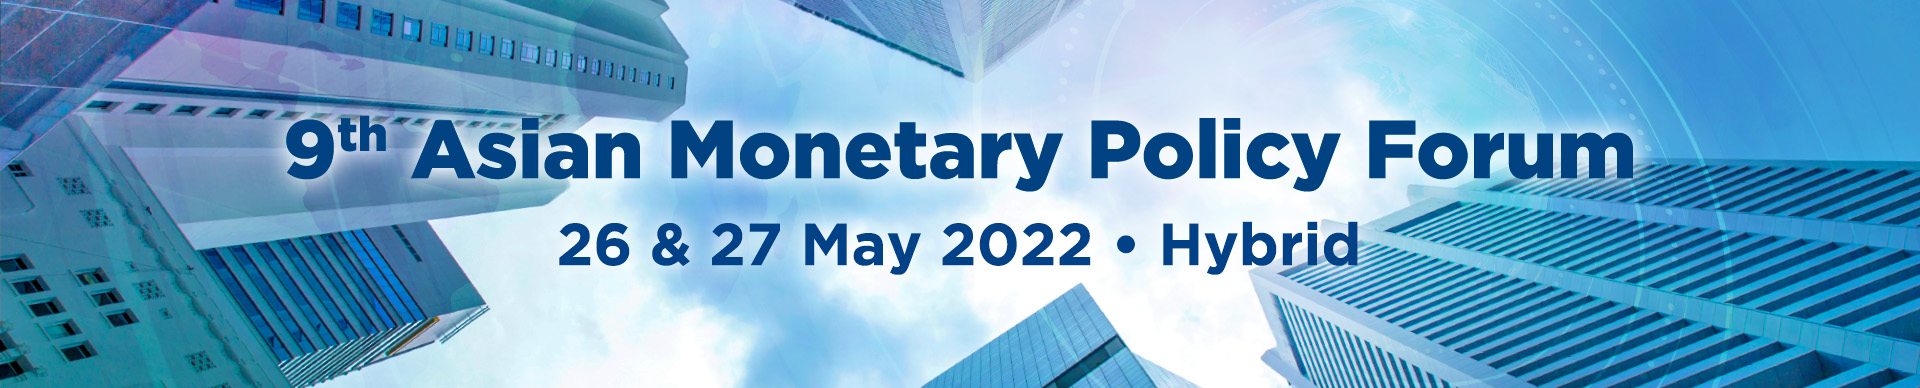 9th Asian Monetary Policy Forum